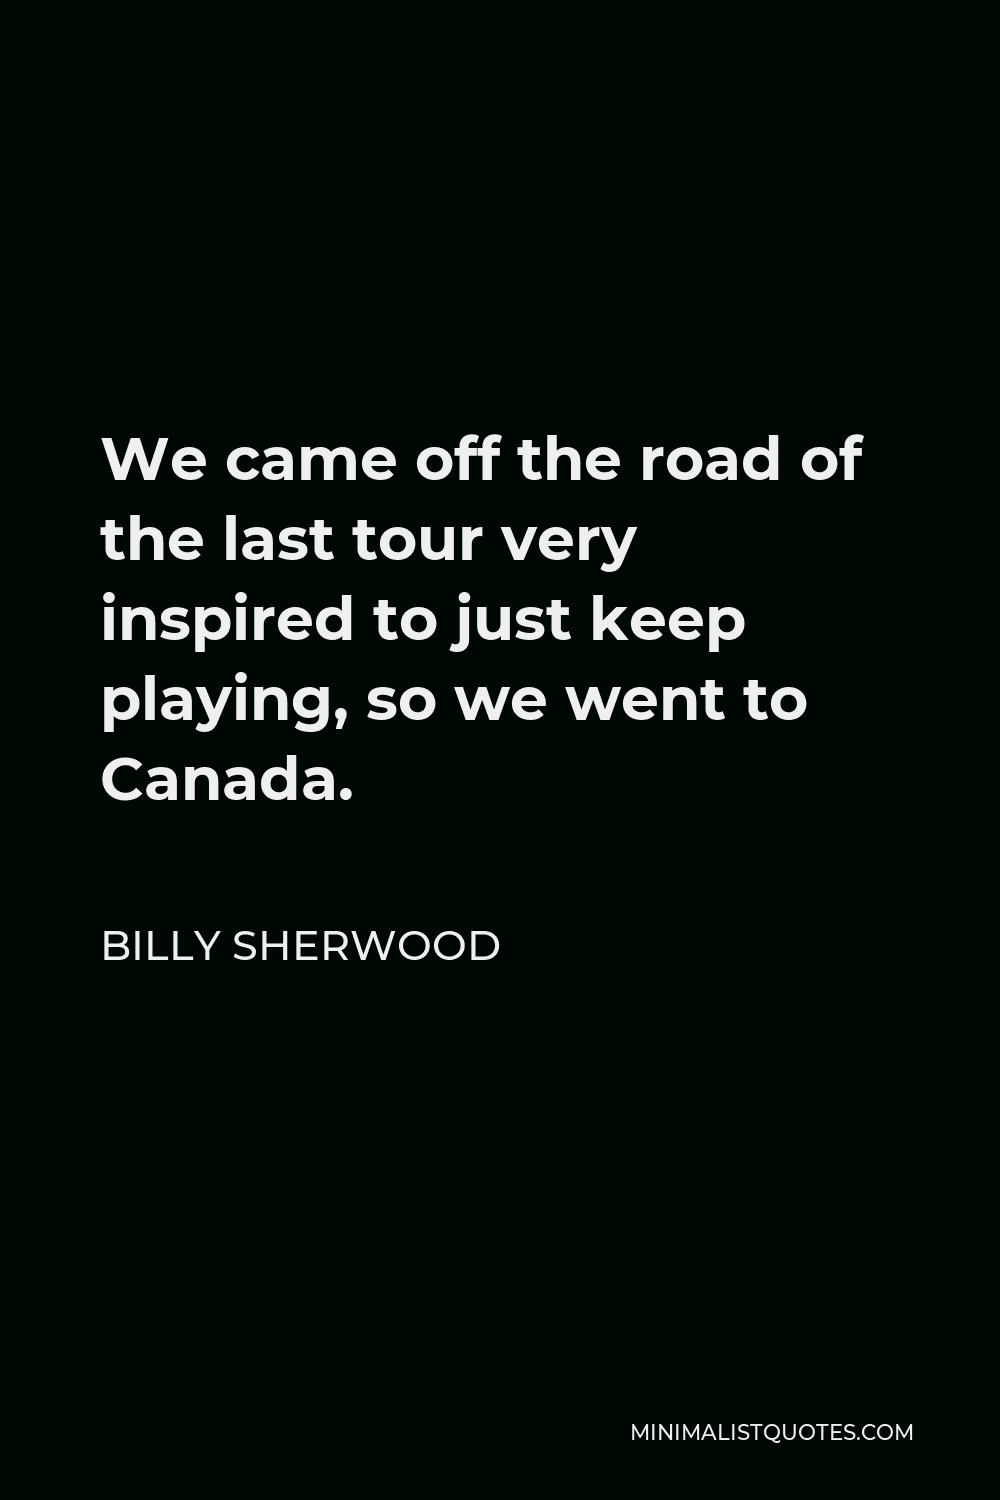 Billy Sherwood Quote - We came off the road of the last tour very inspired to just keep playing, so we went to Canada.